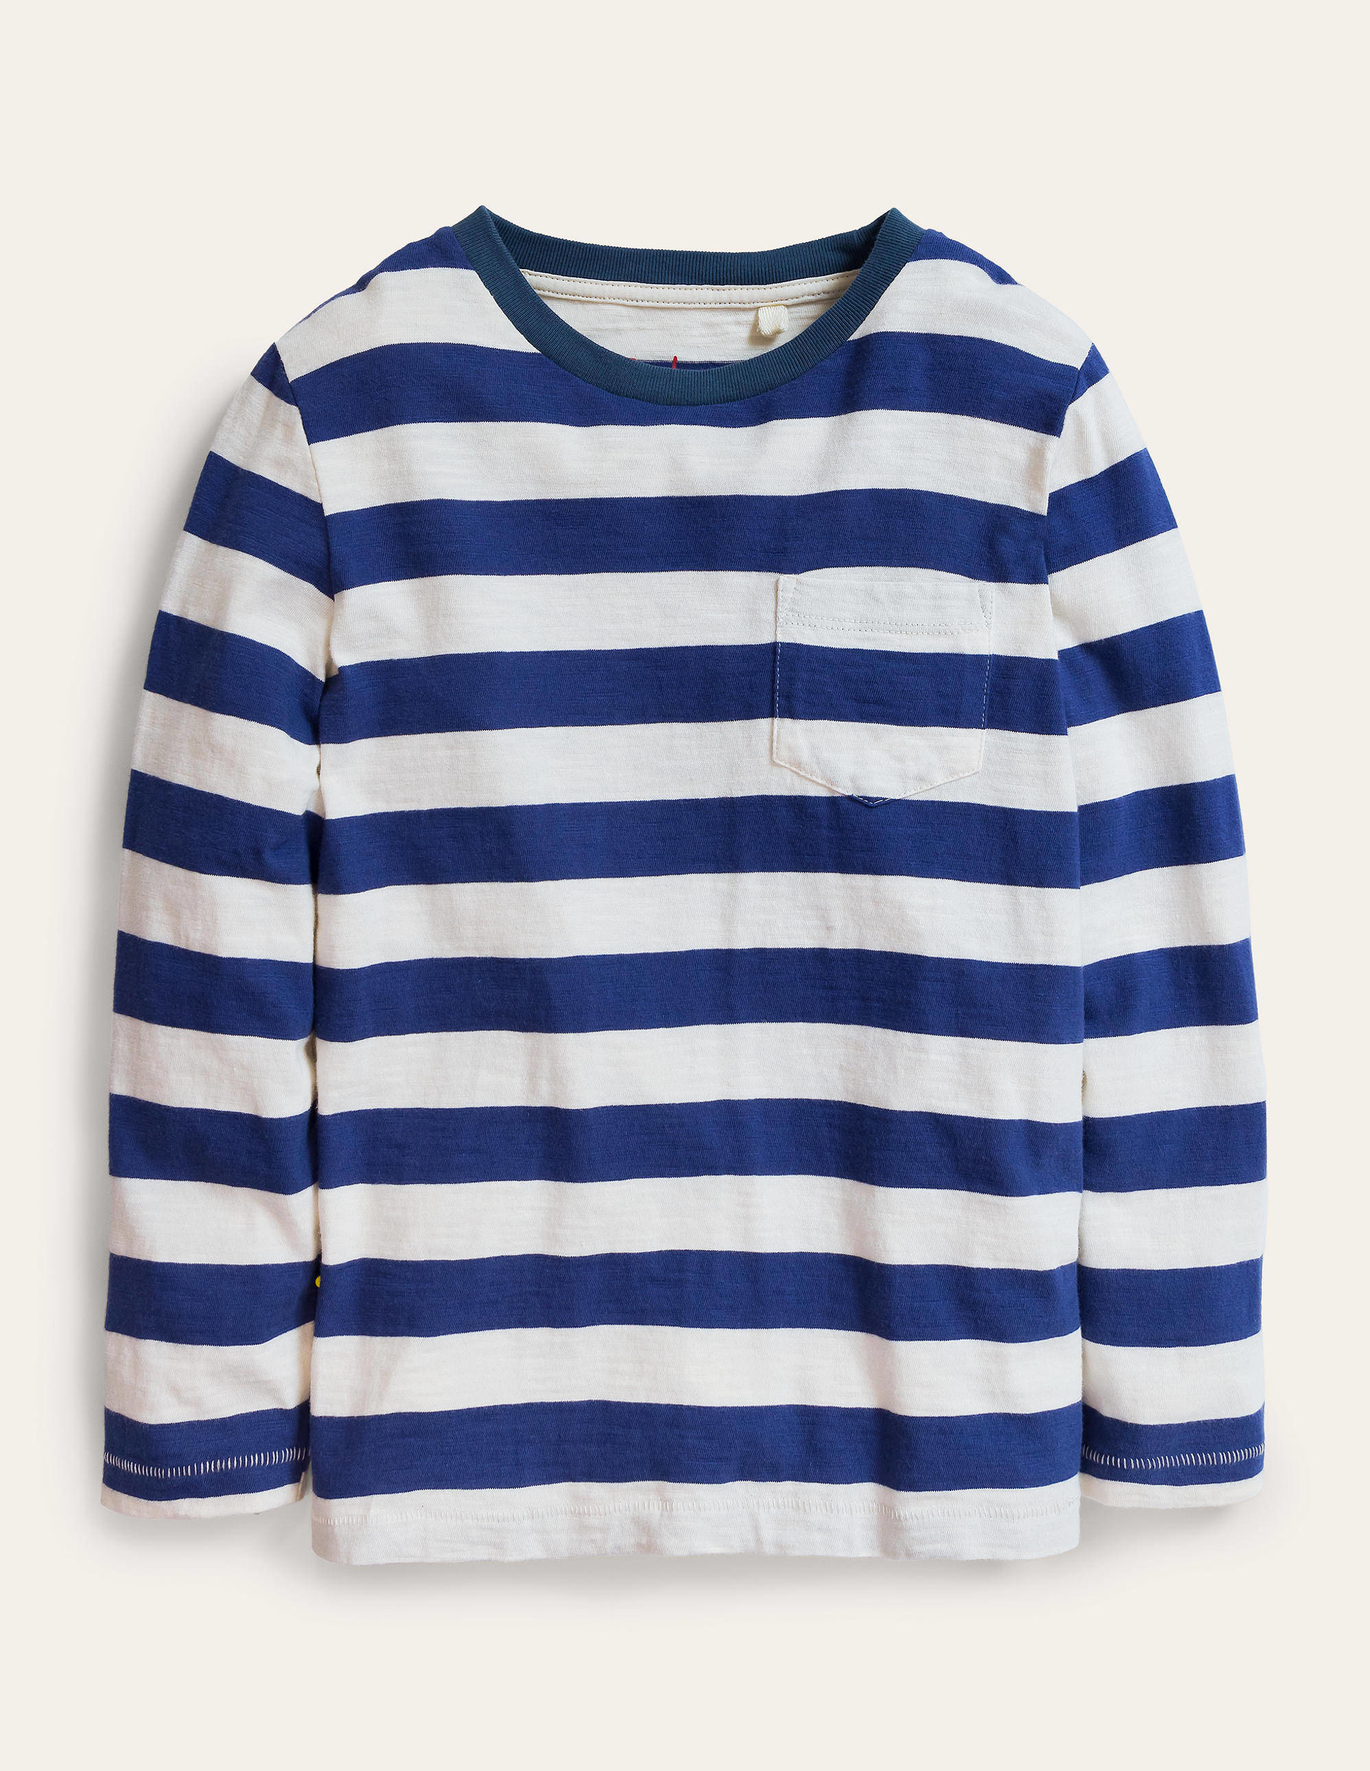 Boden Long-sleeved Washed T-shirt - Starboard/Vanilla Pod